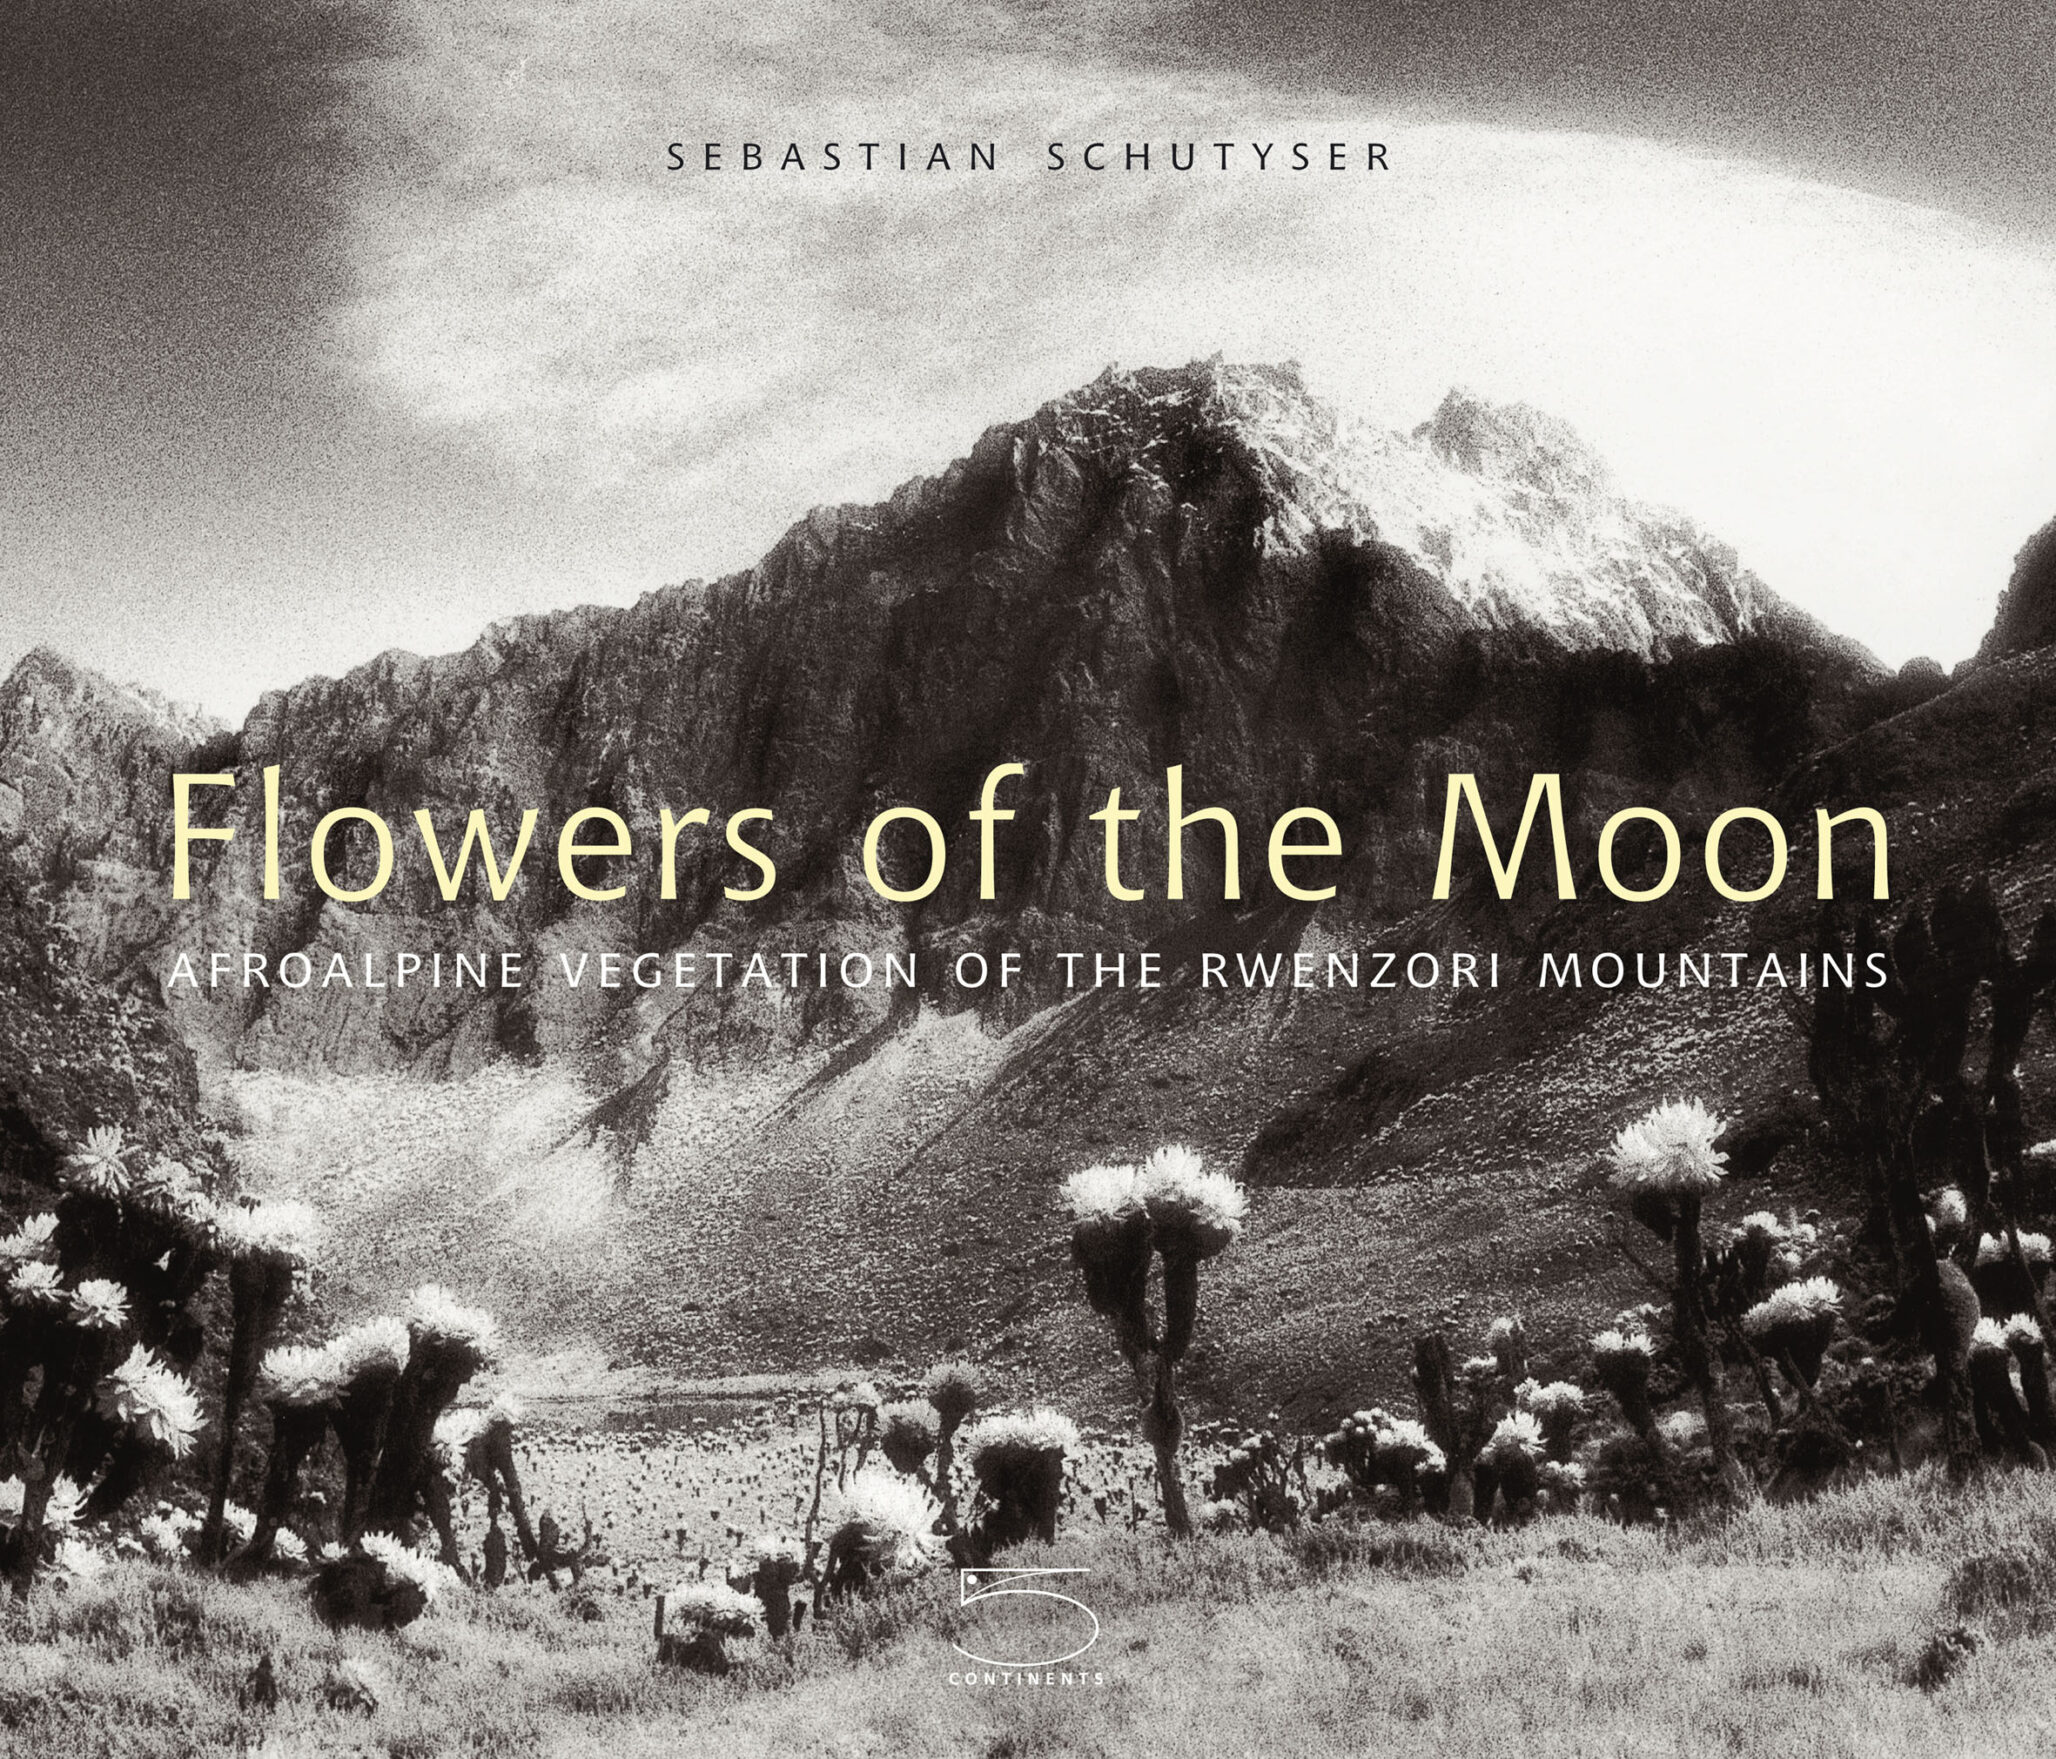 Flowers of the Moon